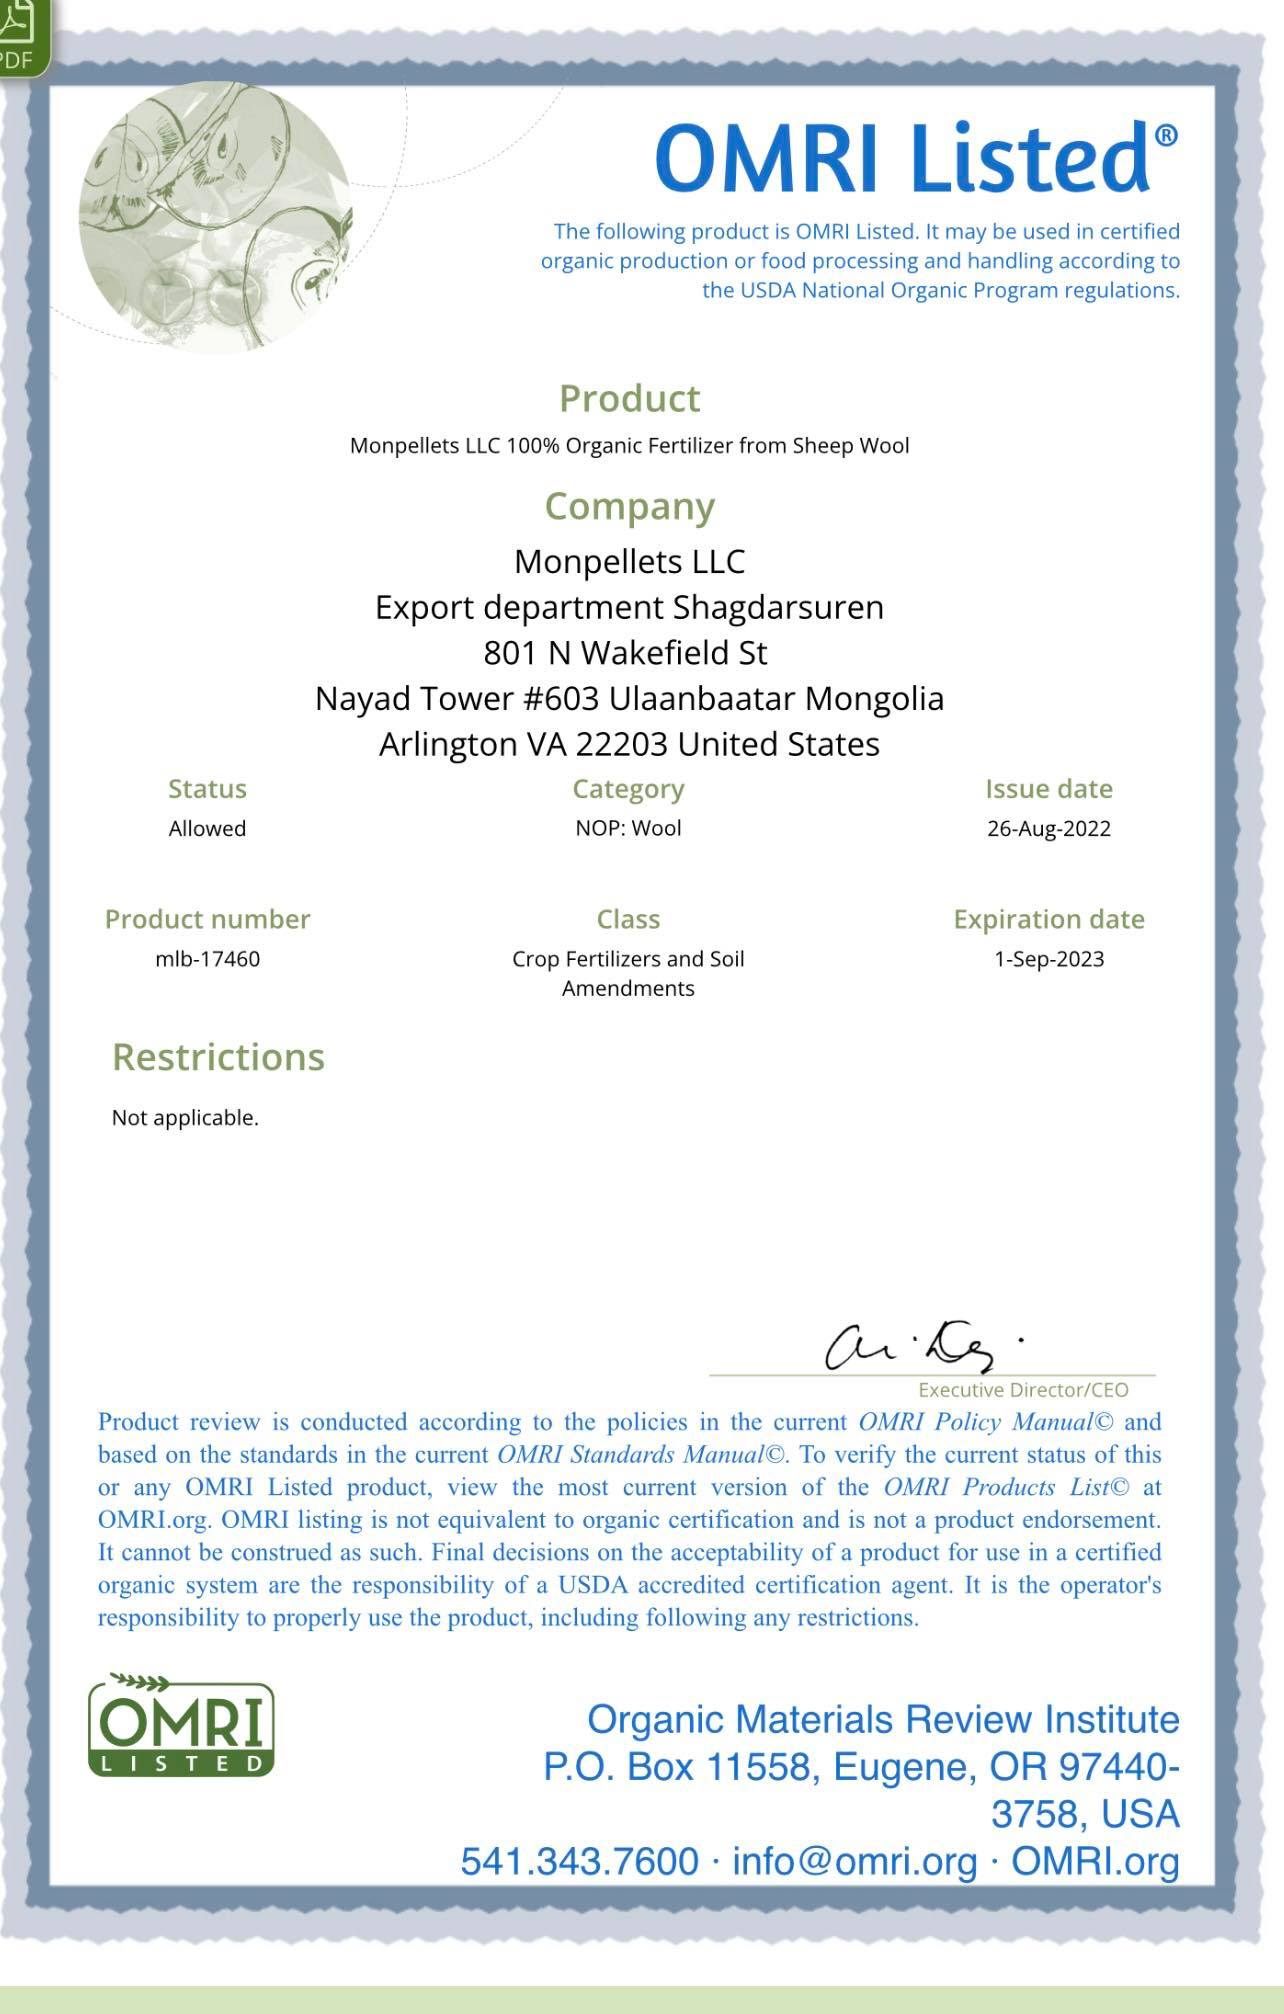 Montpellets Fertilizer has received its US OMRI organic certification on August 2022